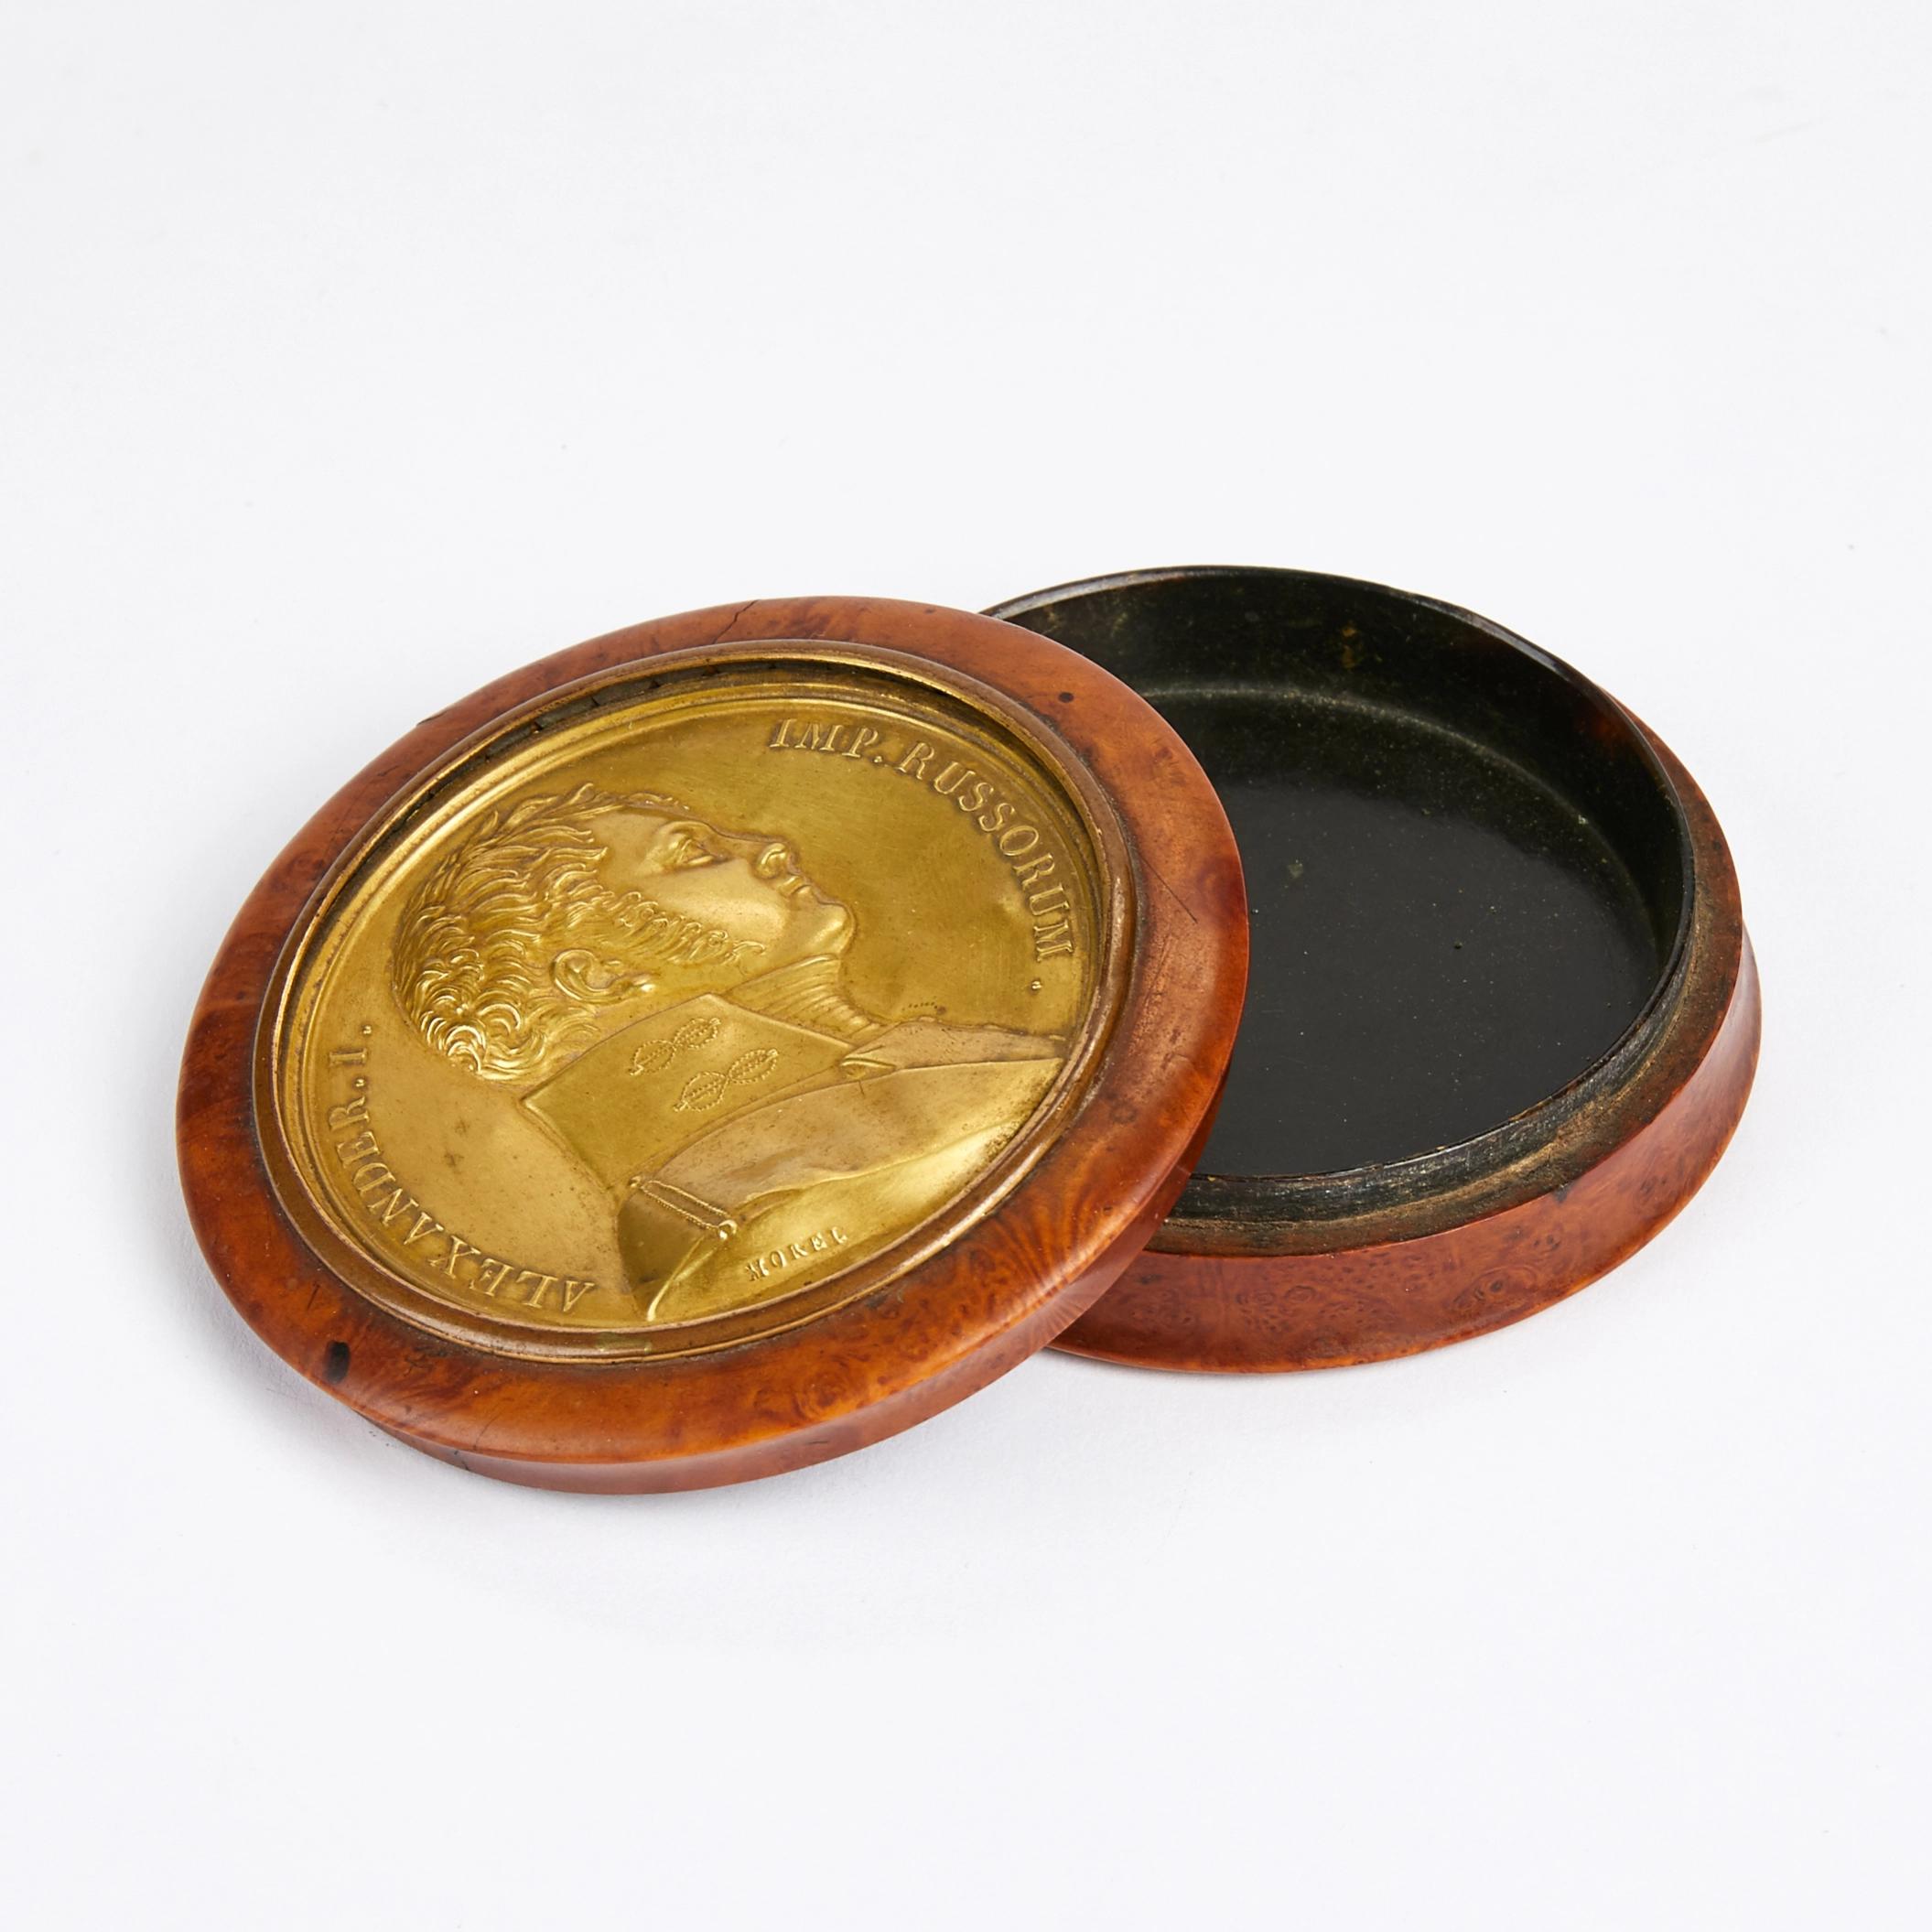 Snuff Box with Alexander I portrait - Image 4 of 5